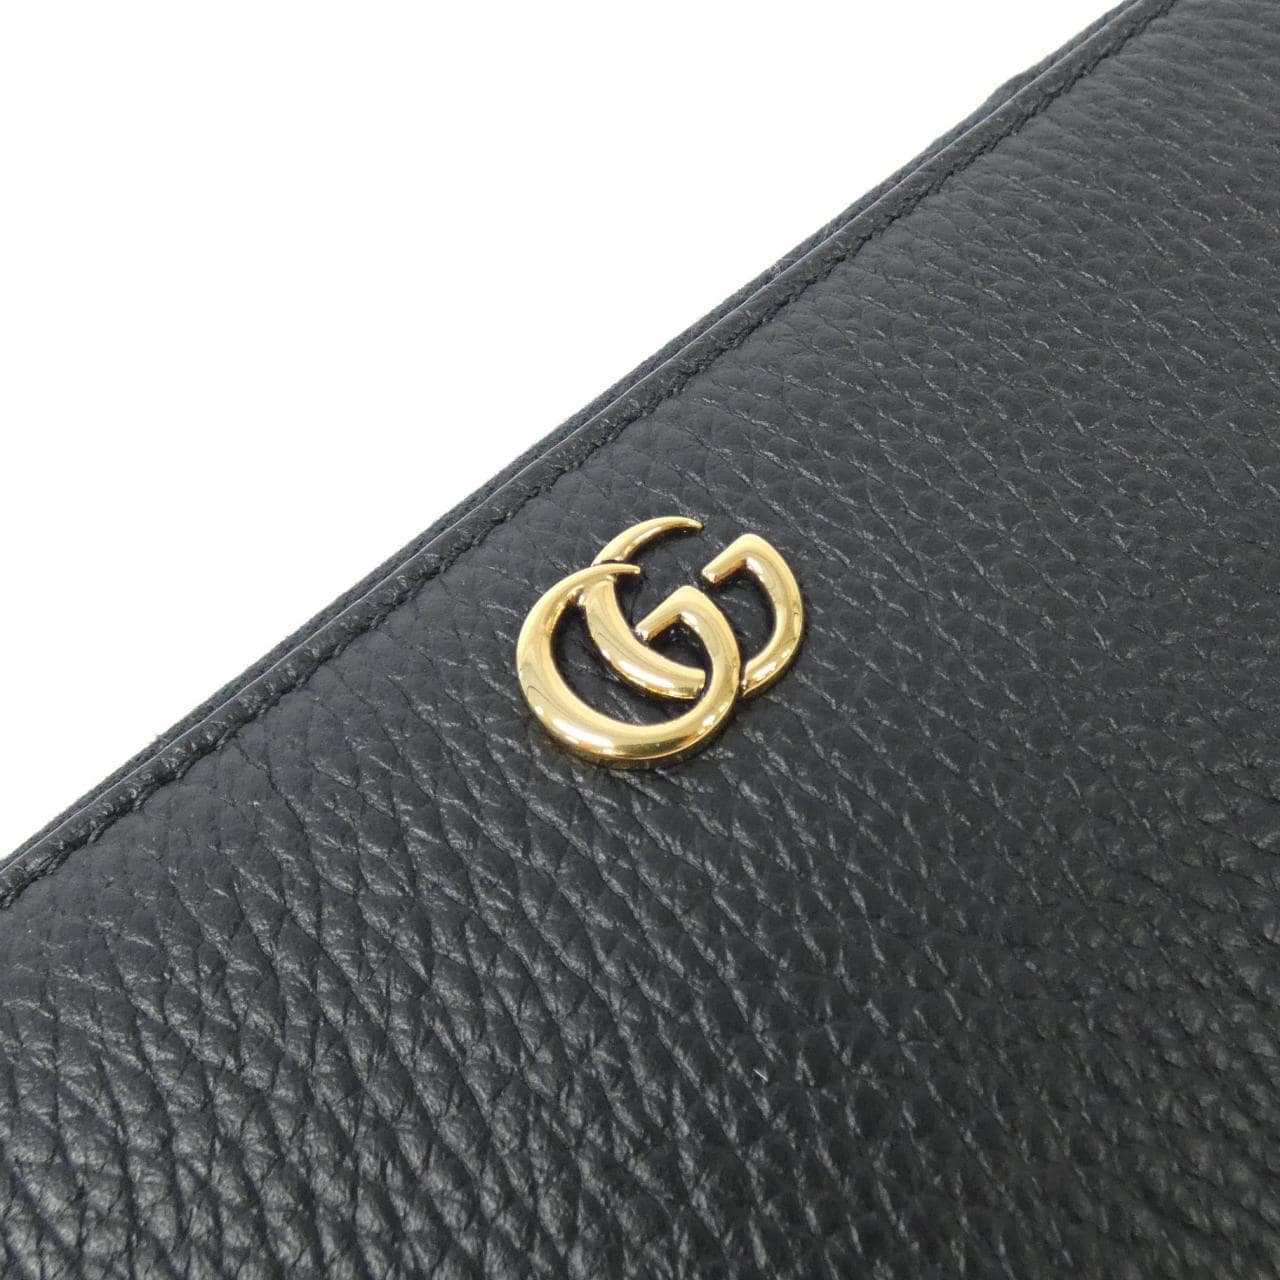 [BRAND NEW] Gucci 739499 AABXM Wallet